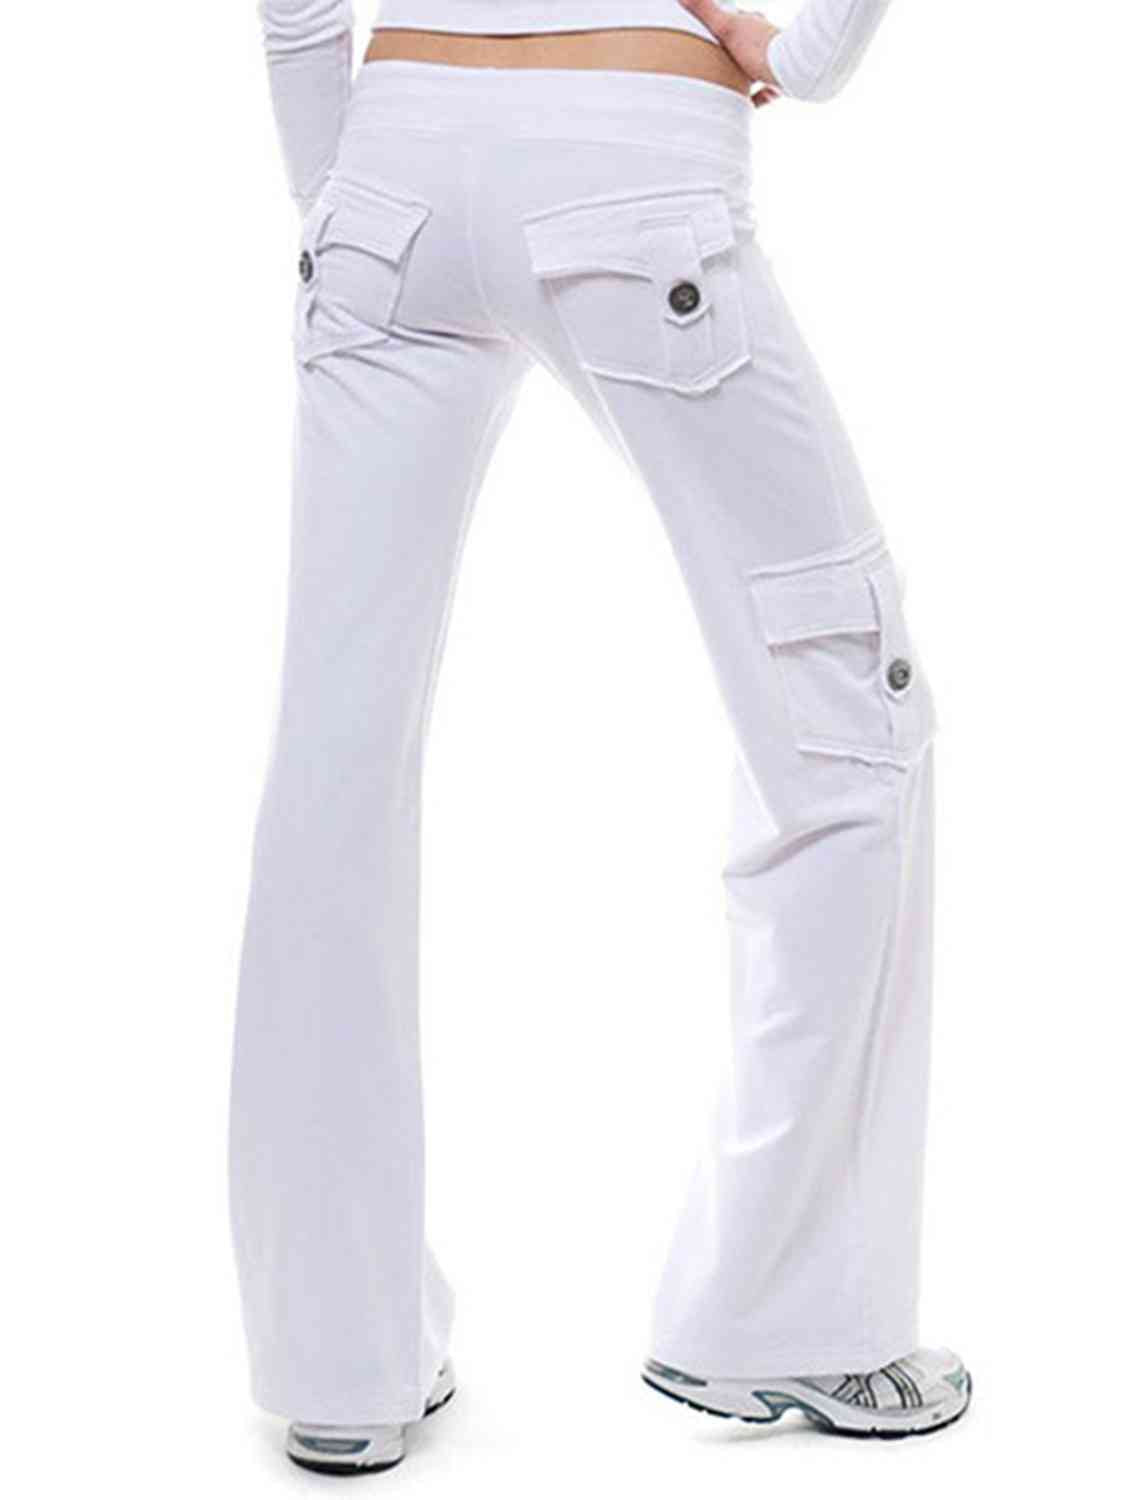 Mid Waist Pants with Pockets - White / XS - Bottoms - Pants - 8 - 2024